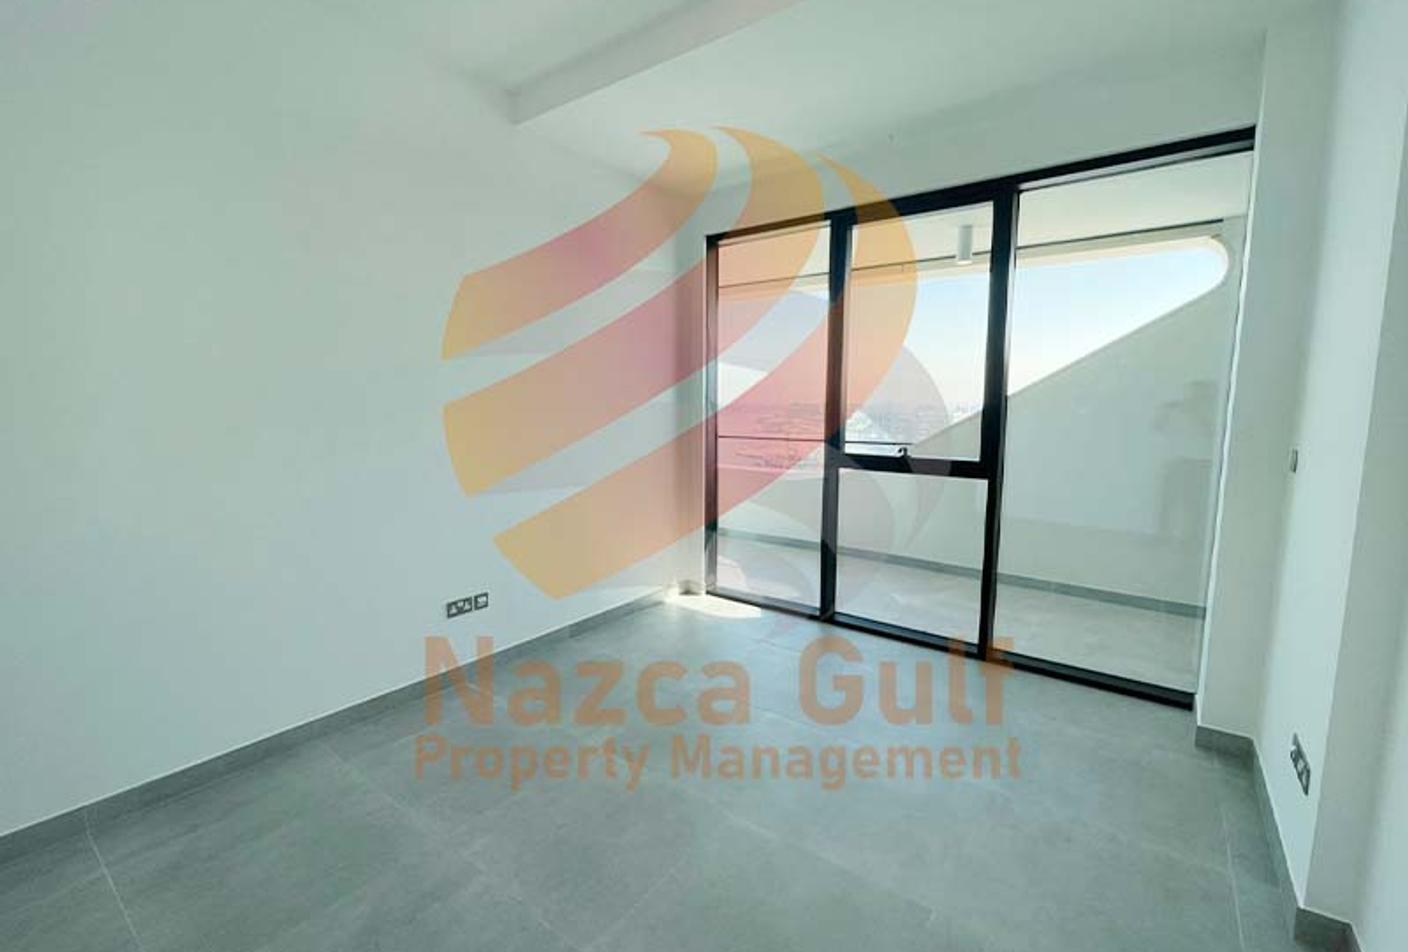 3 bed, 4 bath Hotel & Hotel Apartment for rent in Al Raha Beach Hotel, Al Raha Beach, Abu Dhabi for price AED 185000 yearly 